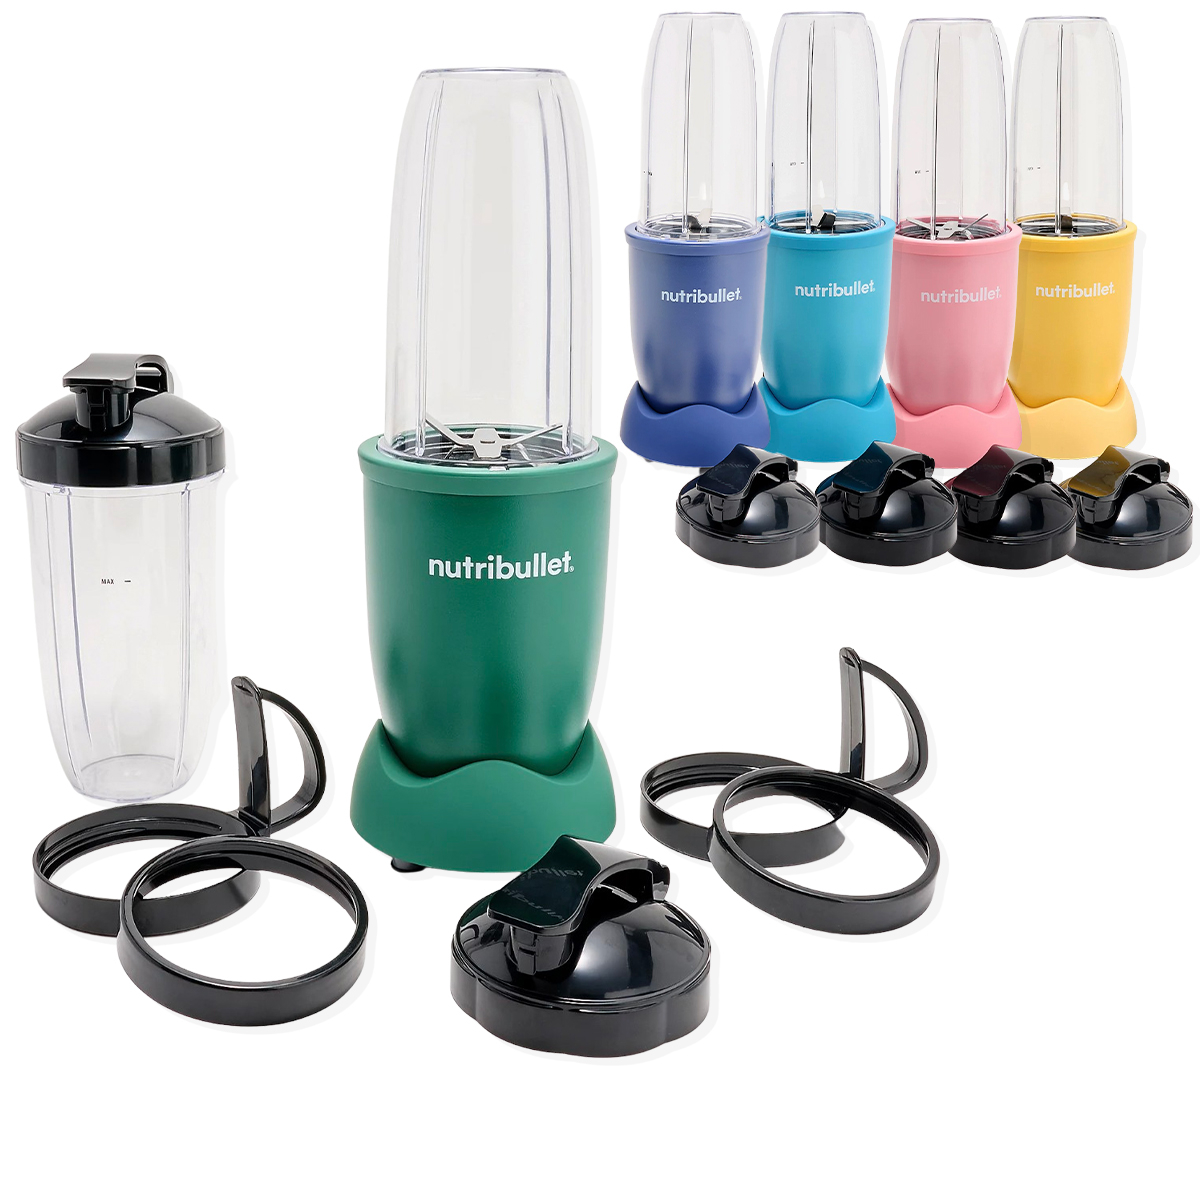 Check Out Nutribullet on SALE!